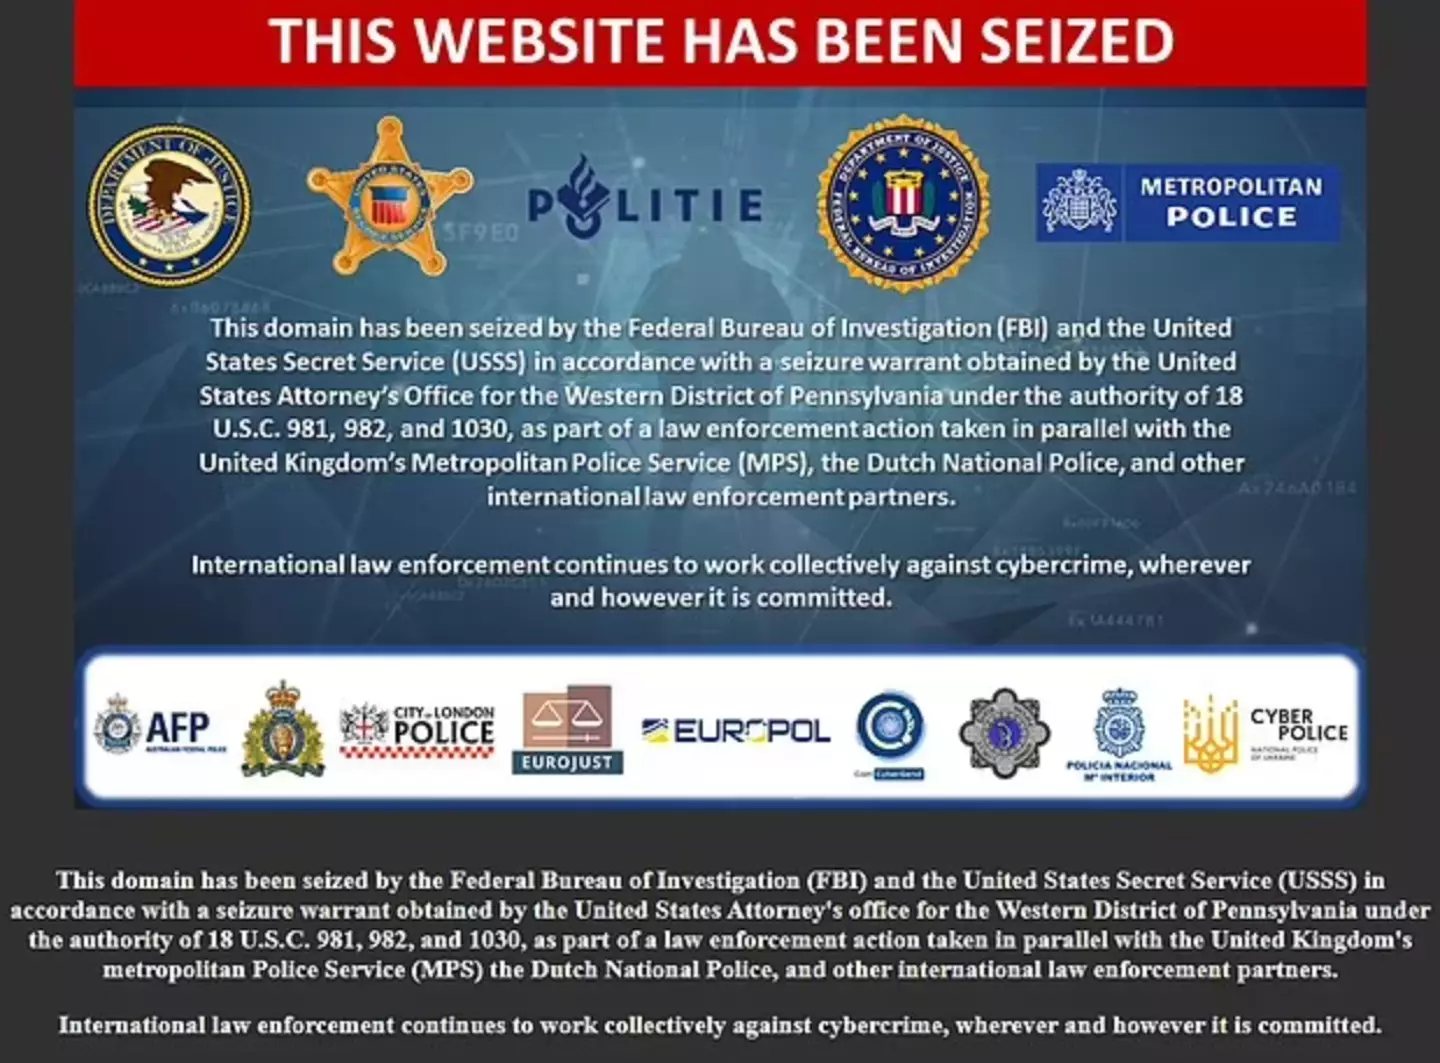 The website has since been taken down by the Metropolitan Police.